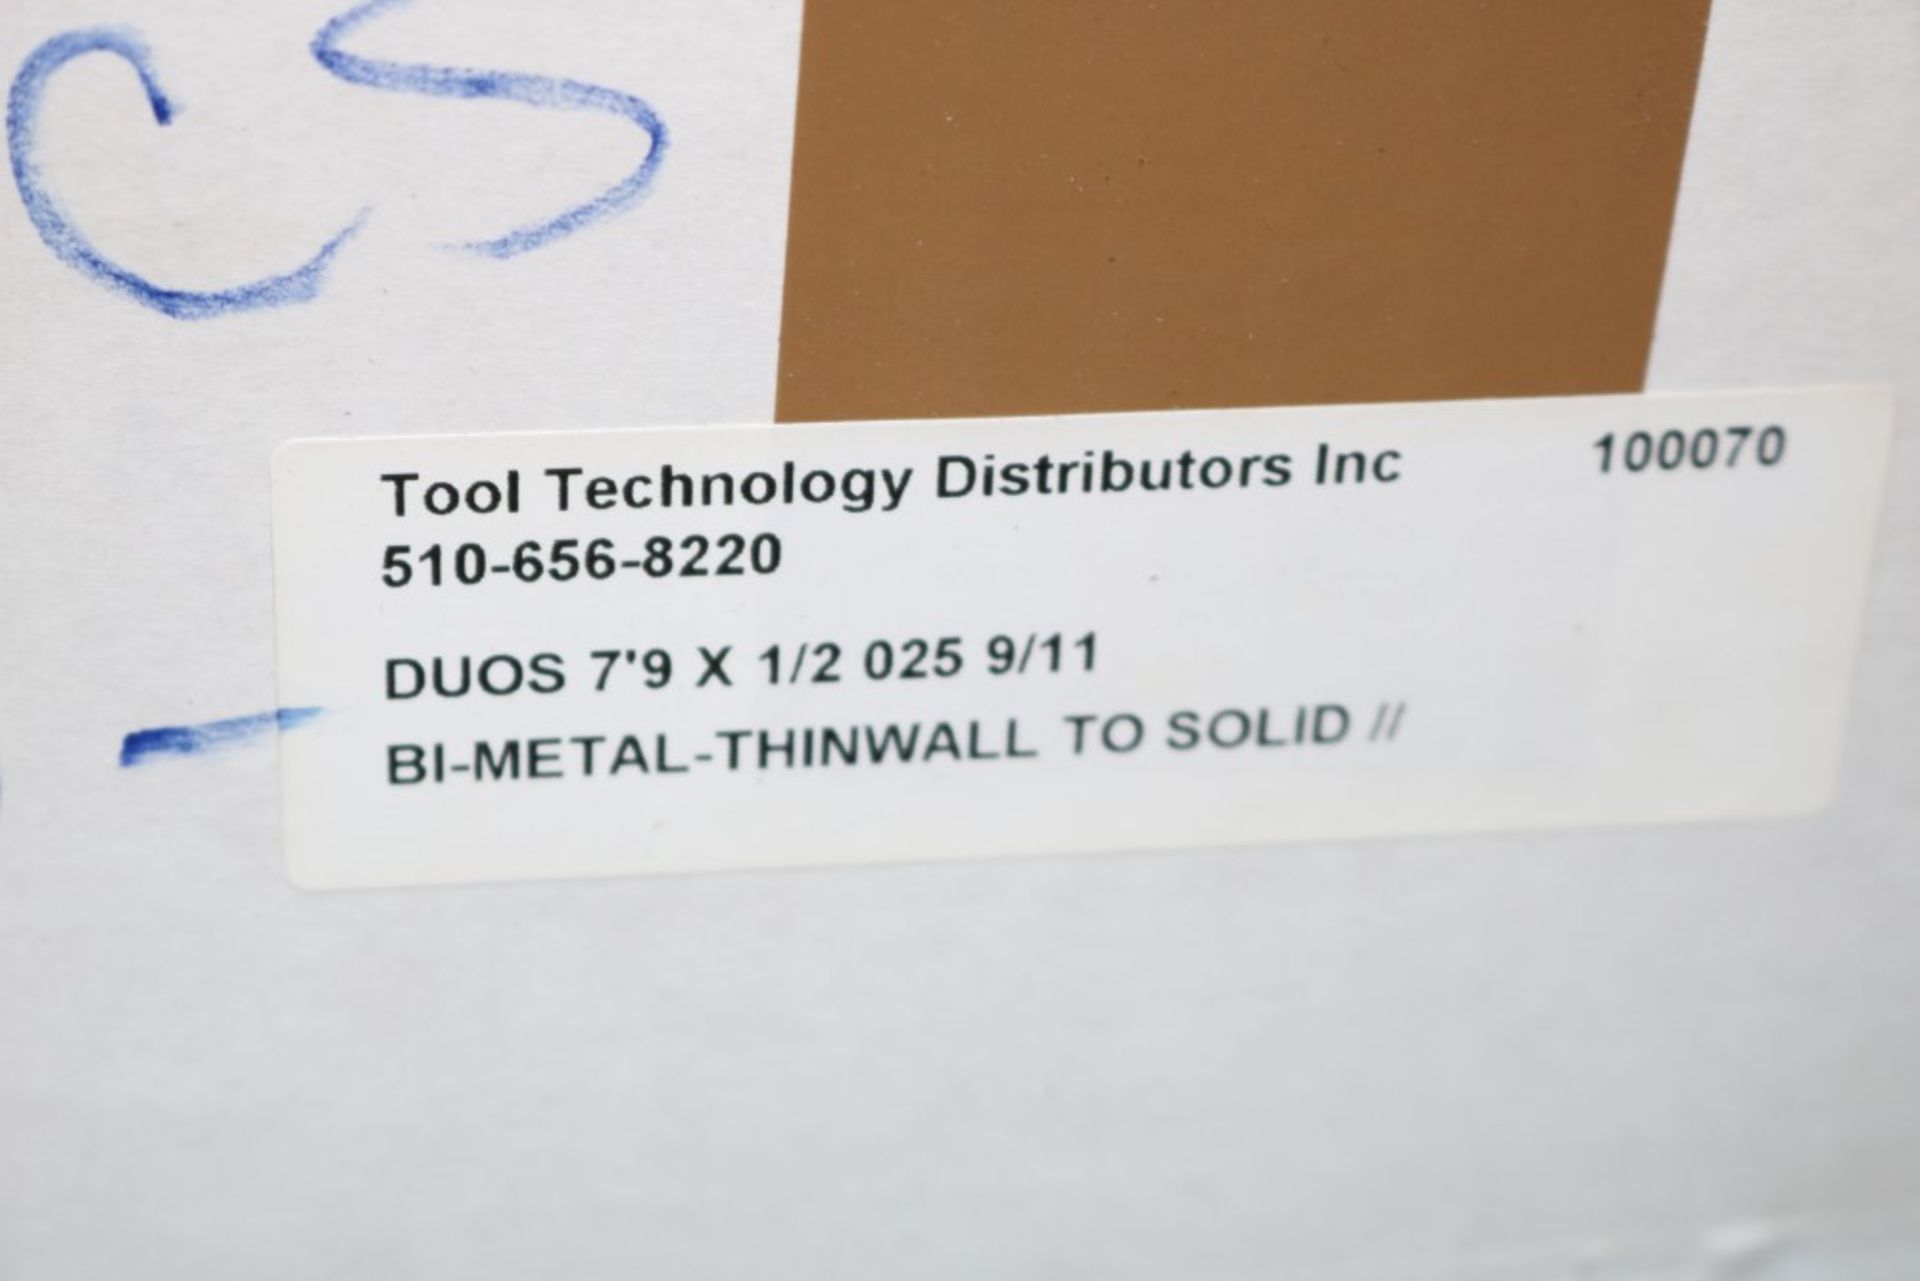 New Band Saw Blades, Fits 14" Vertical Saws, (6) 7'9" x 3/4" x 9/11" and (4) 7'9" x 1/2" x 9/11" - Image 3 of 5